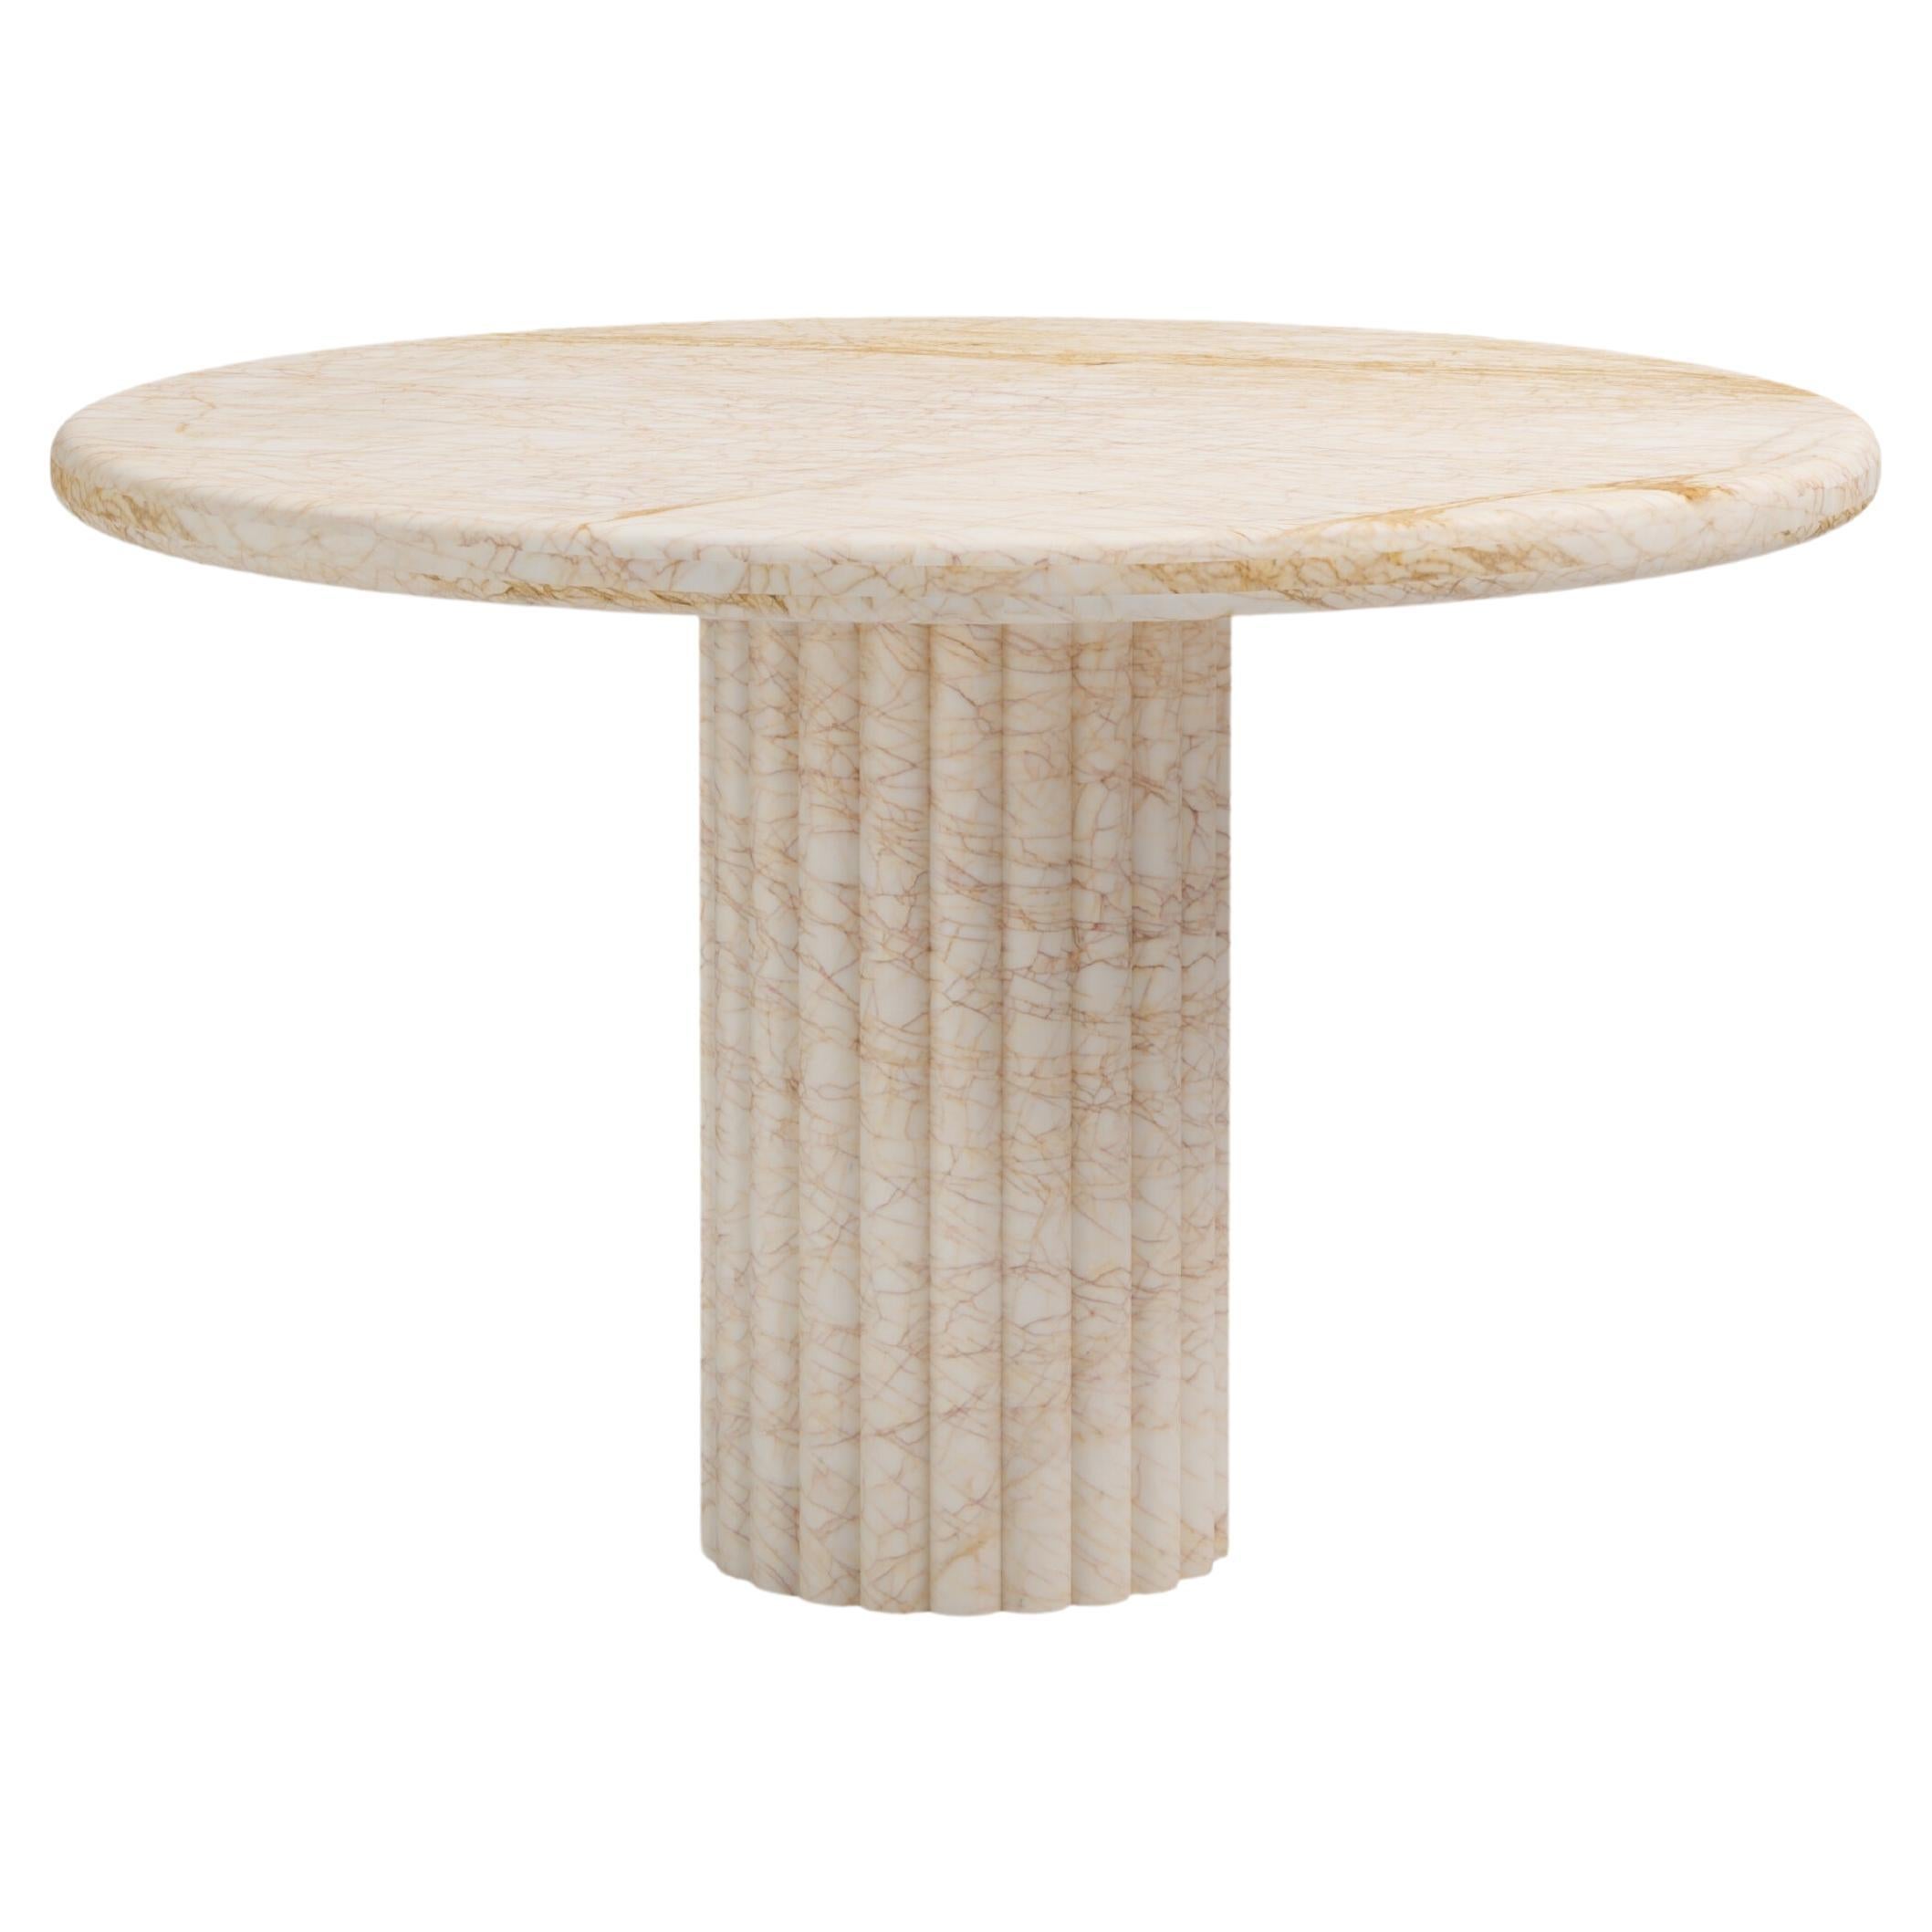 FORM(LA) Fluta Round Dining Table 60”L x 60”W x 30”H Golden Spider Marble For Sale